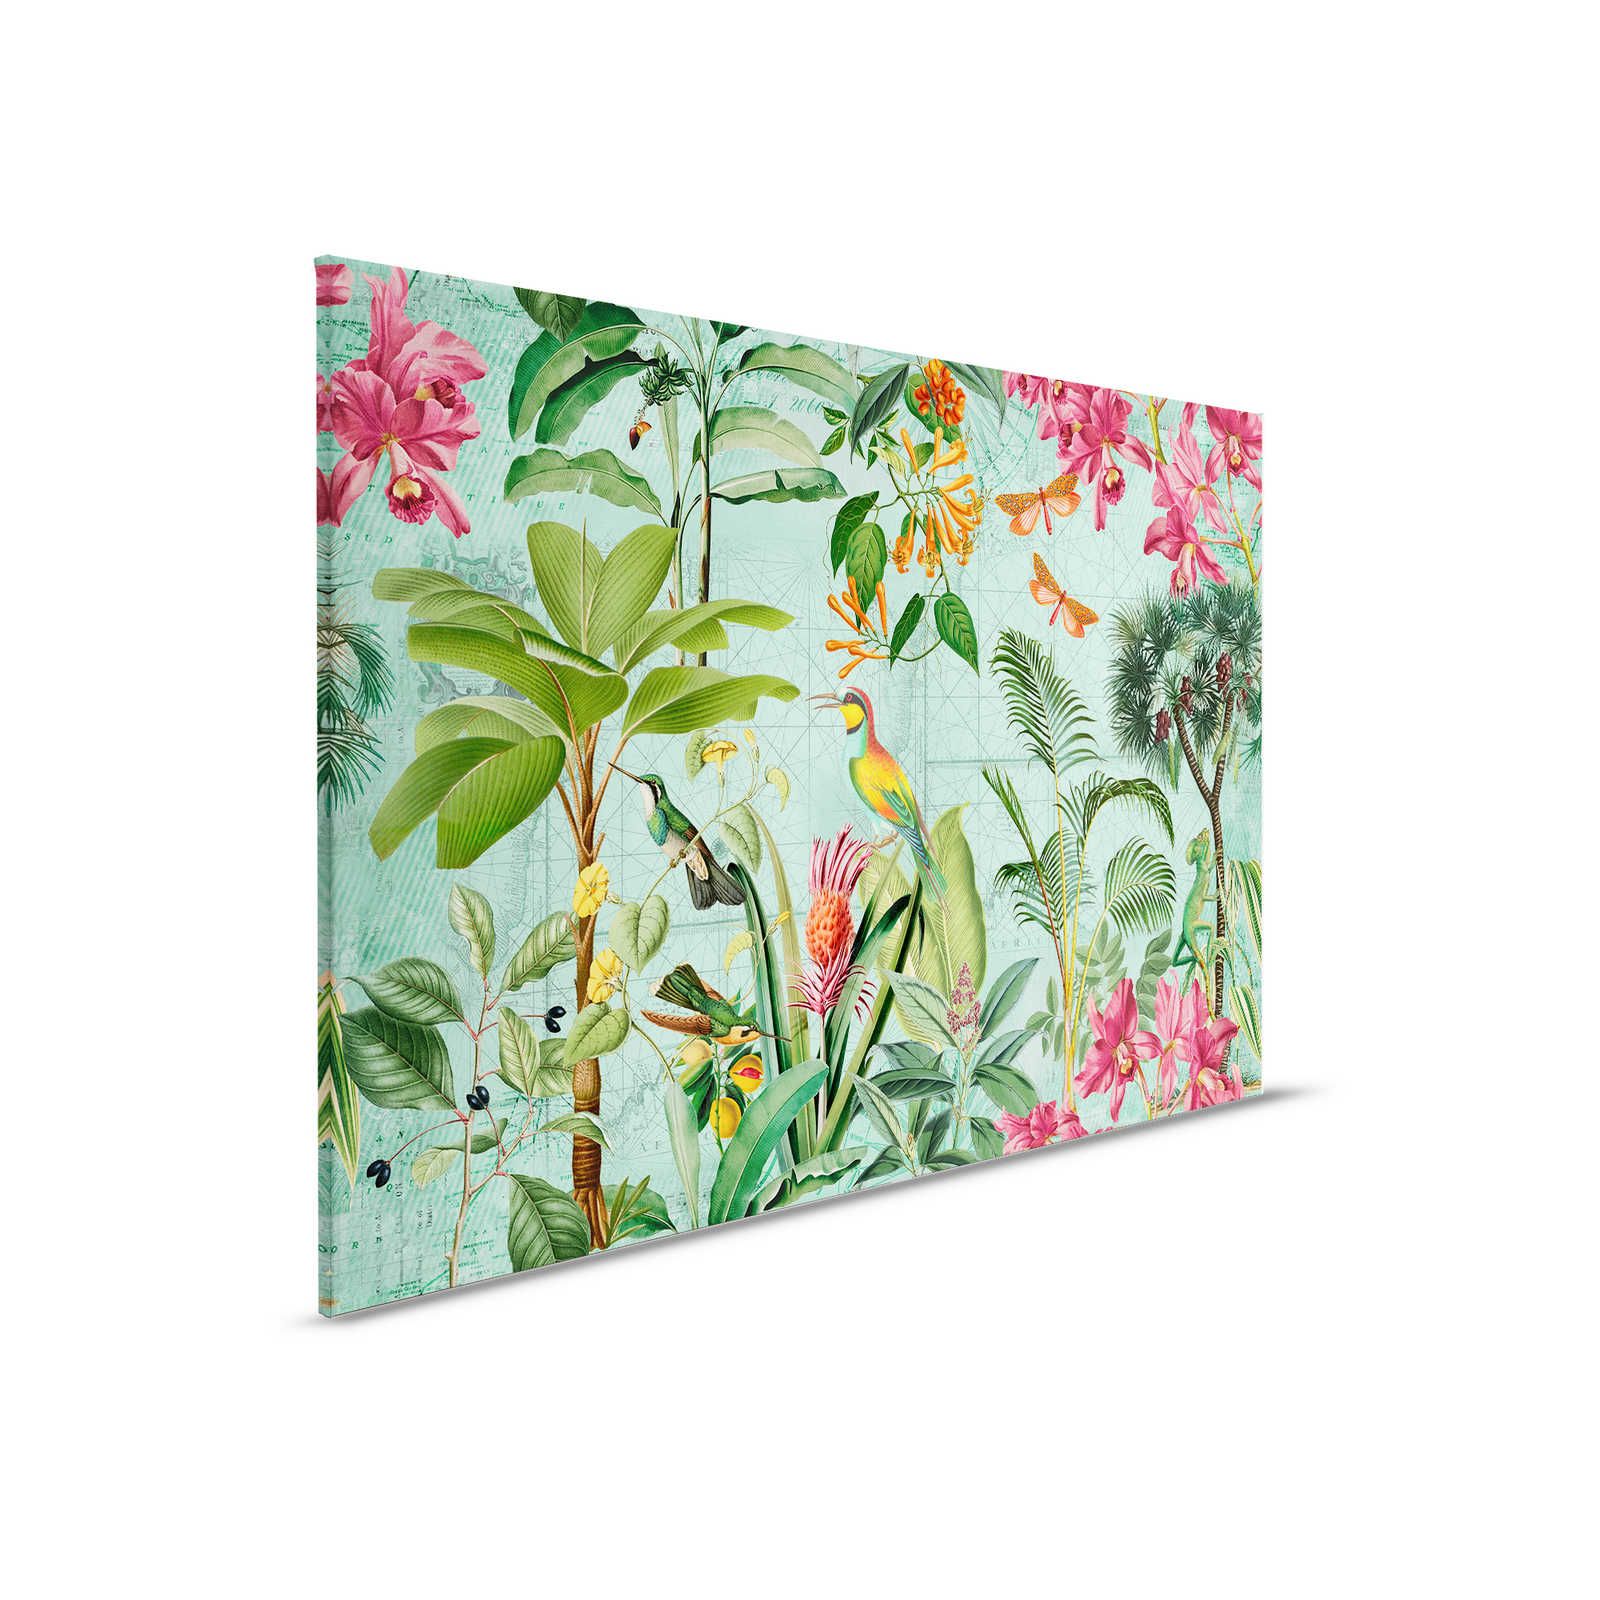 Colourful Jungle Canvas Painting with Trees, Flowers & Animals - 0.90 m x 0.60 m
